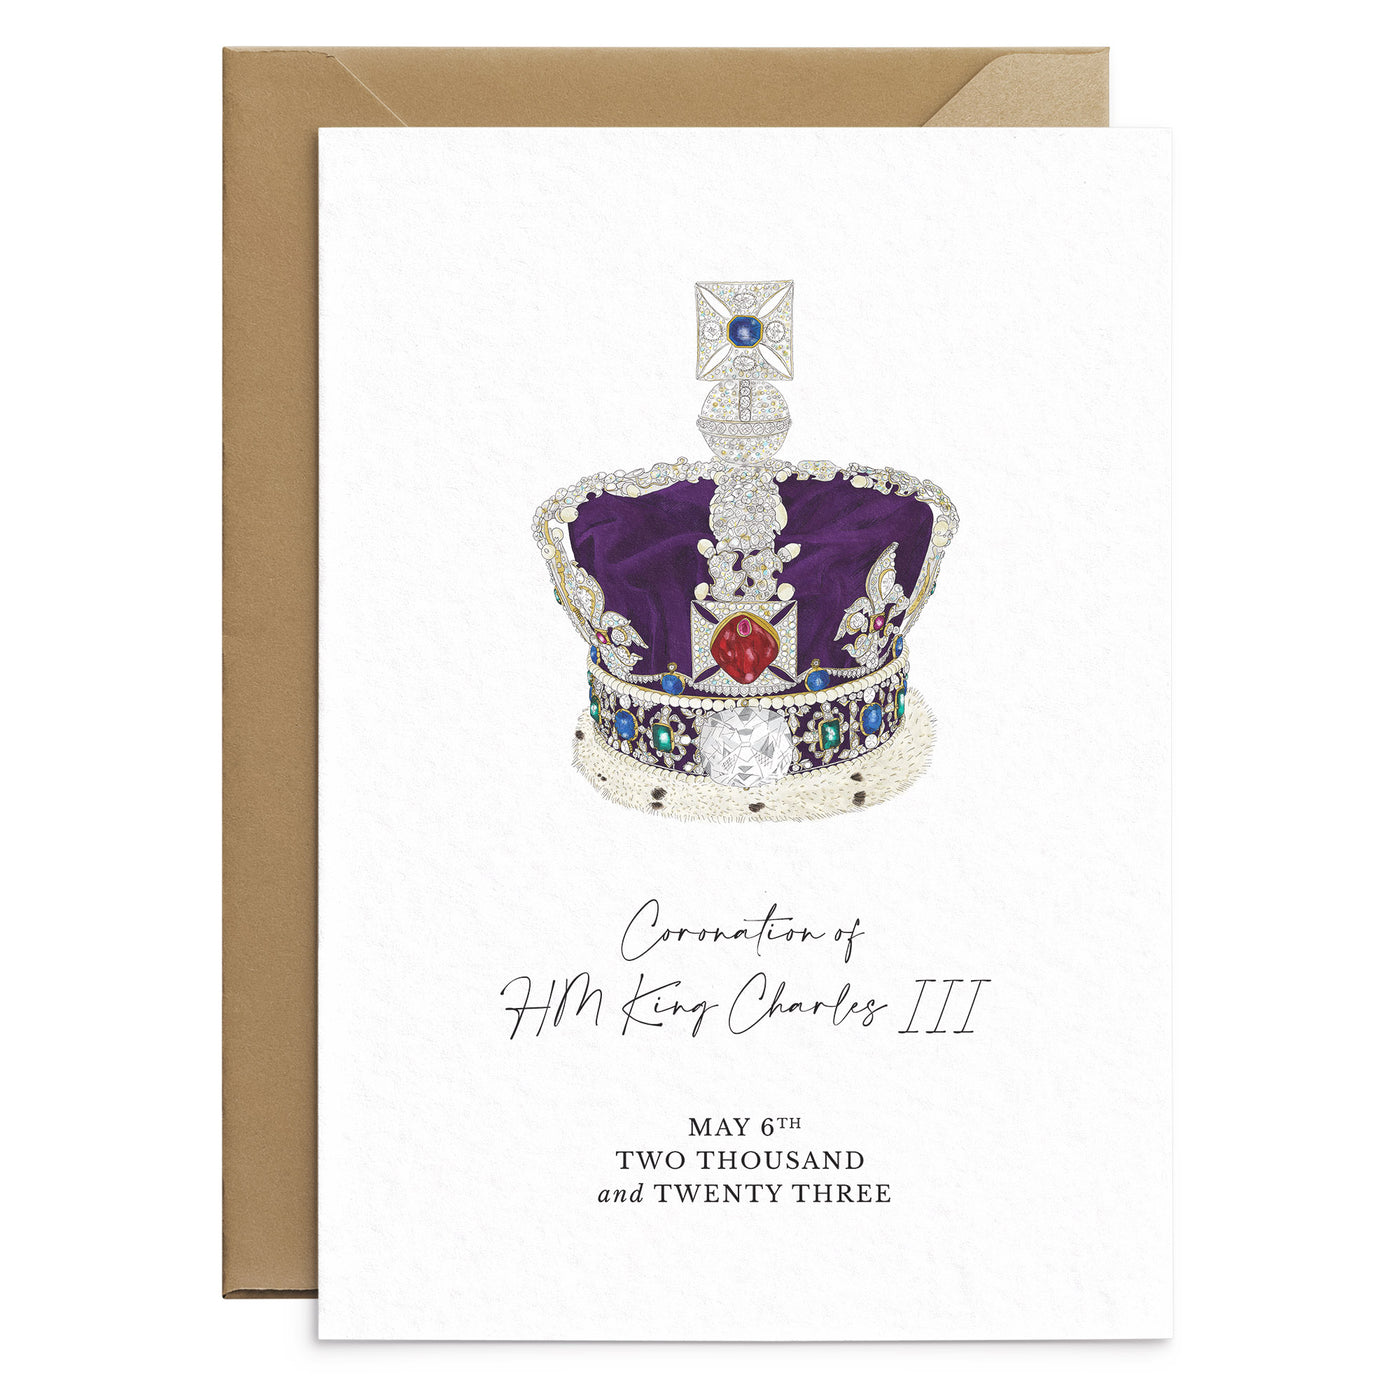 King-Charles-Crown-Jewels-Coronation-Card-Poppins-and-co